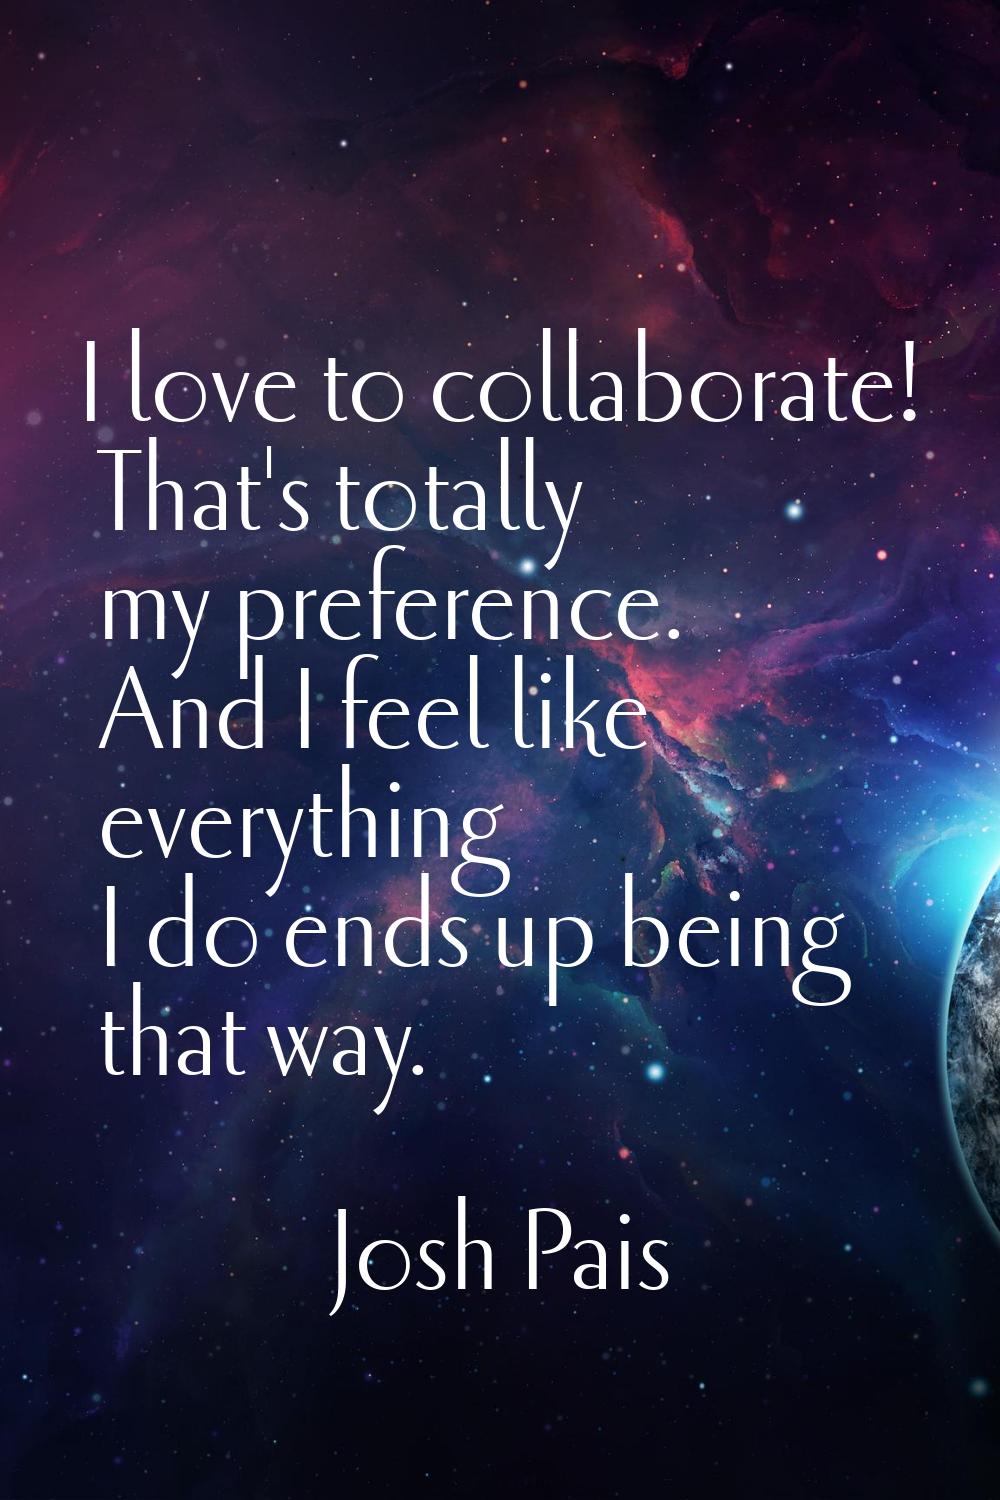 I love to collaborate! That's totally my preference. And I feel like everything I do ends up being 